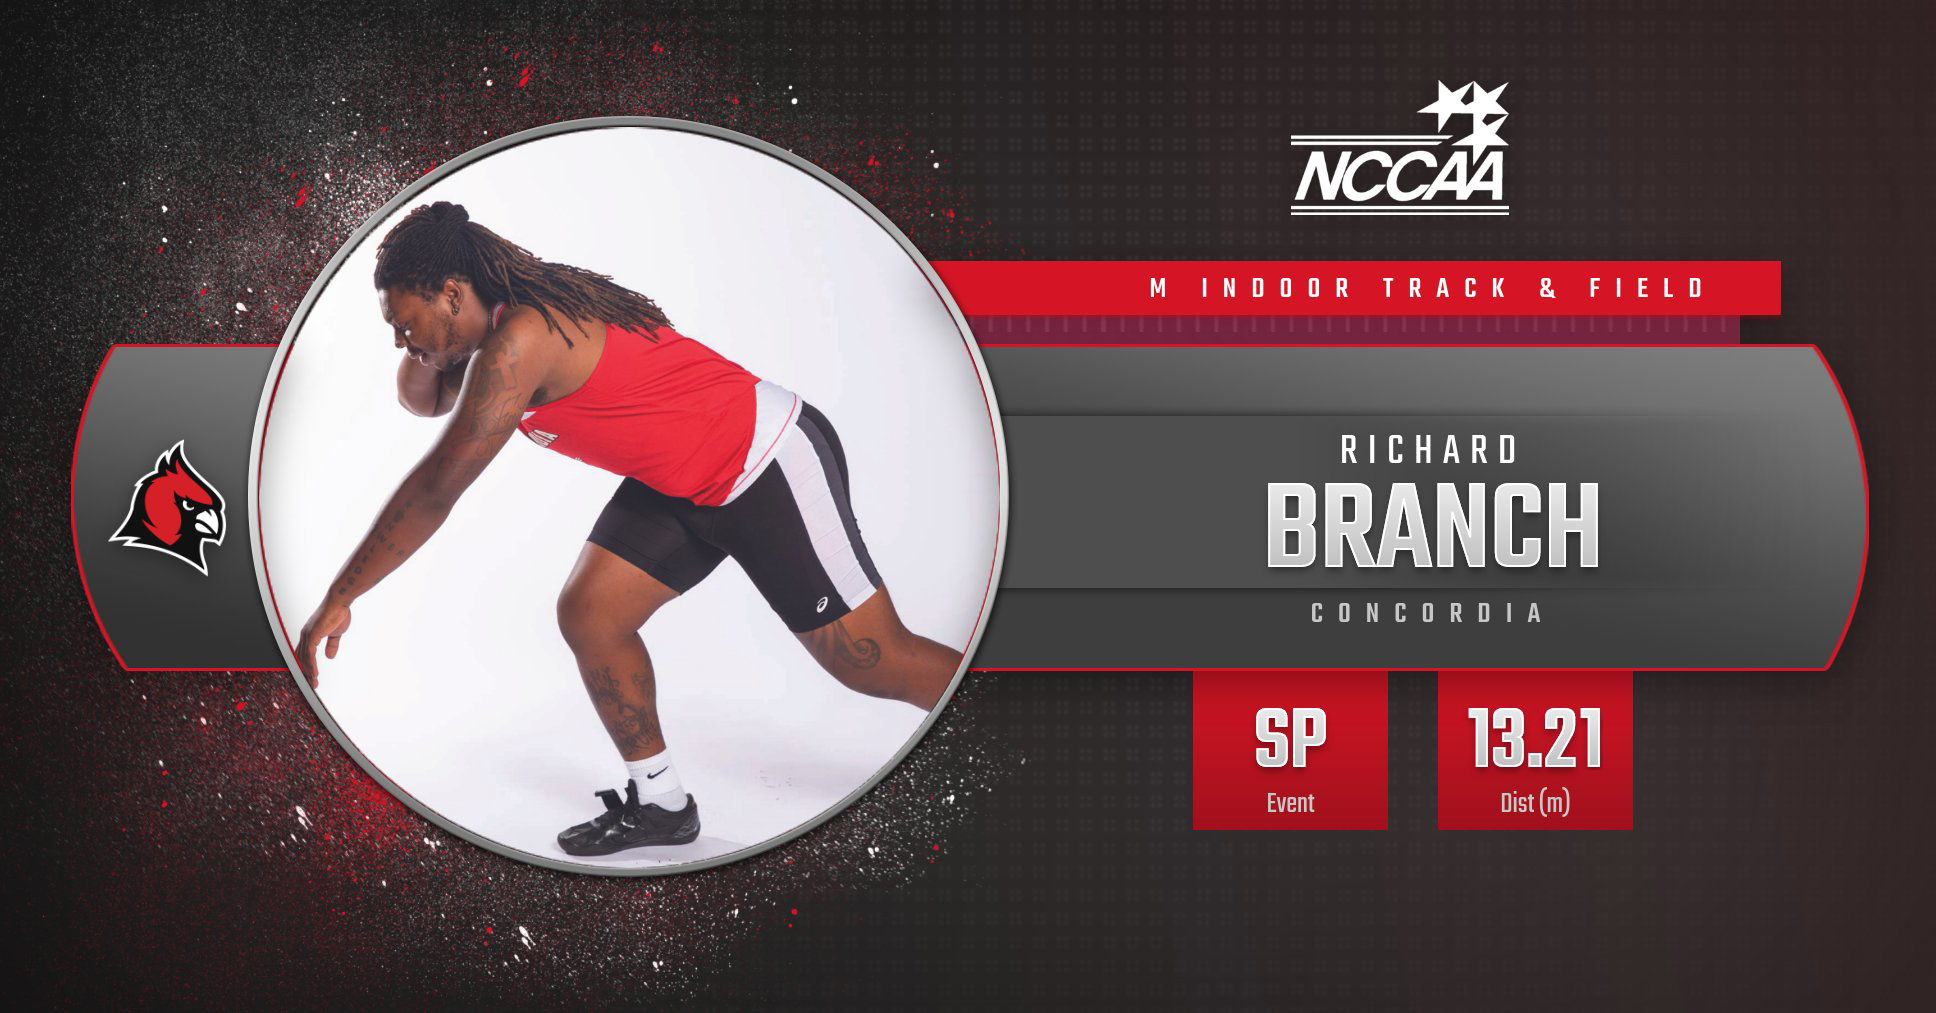 Richard Branch named NCCAA Student-Athlete of the Week